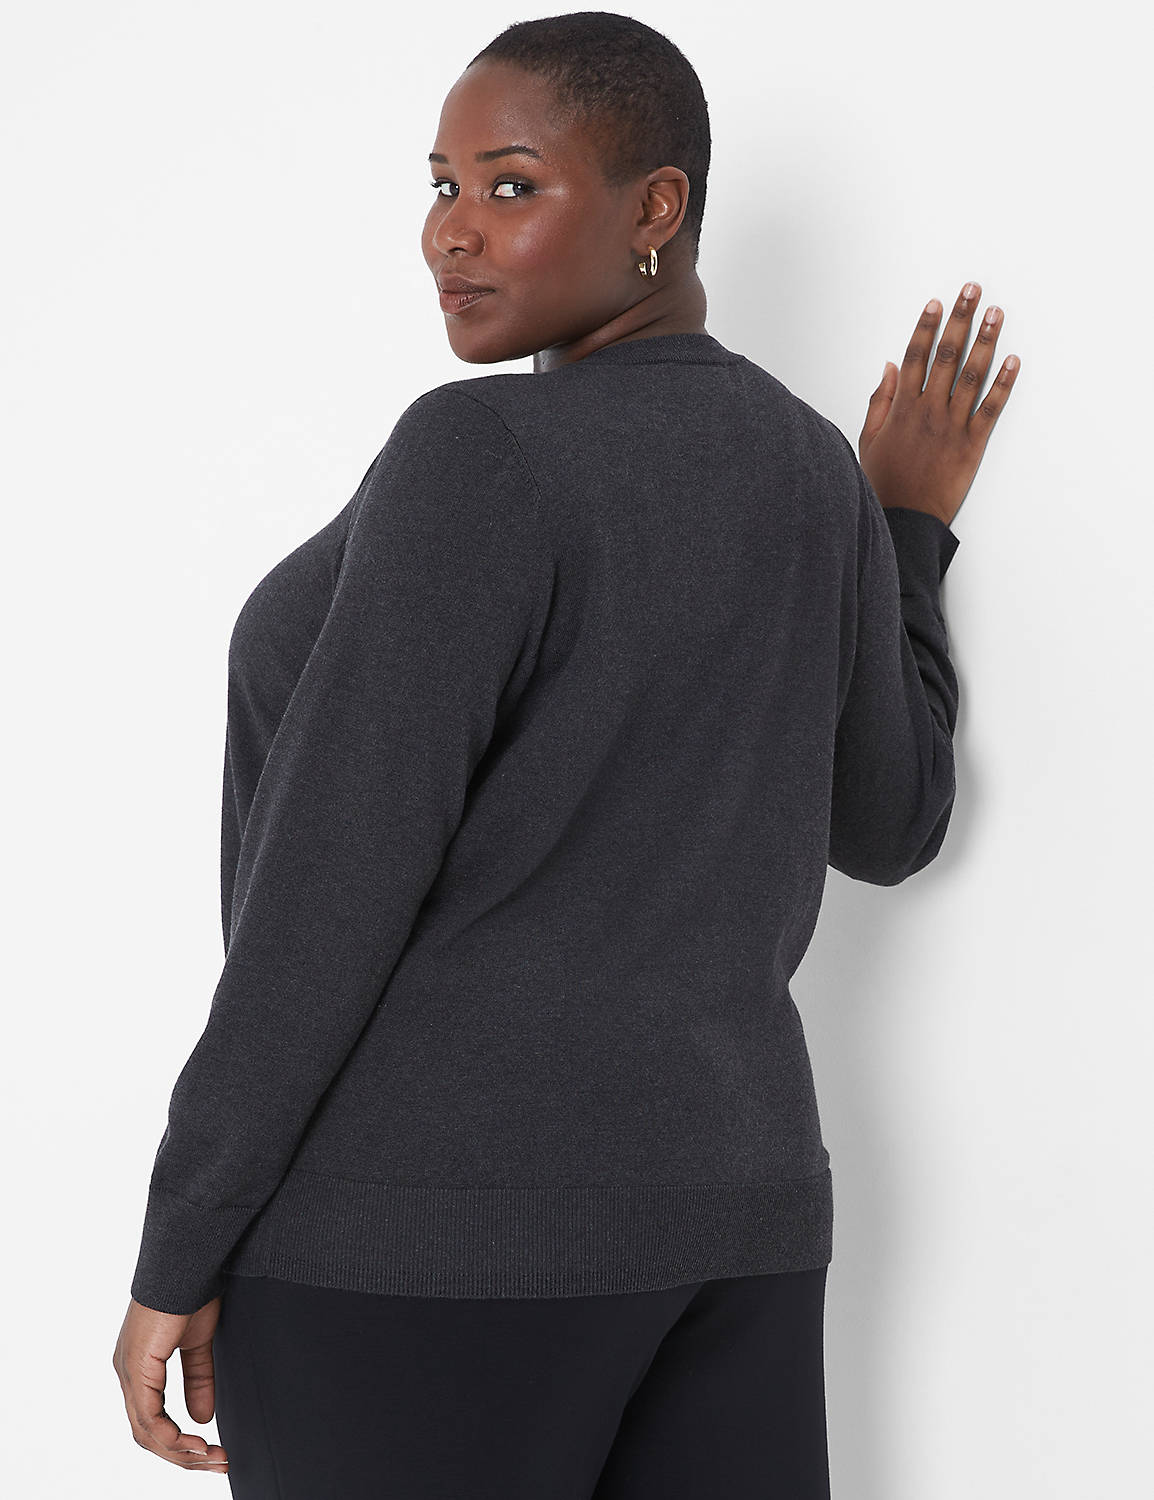 Classic Long Sleeve Crew Neck Butto | LaneBryant